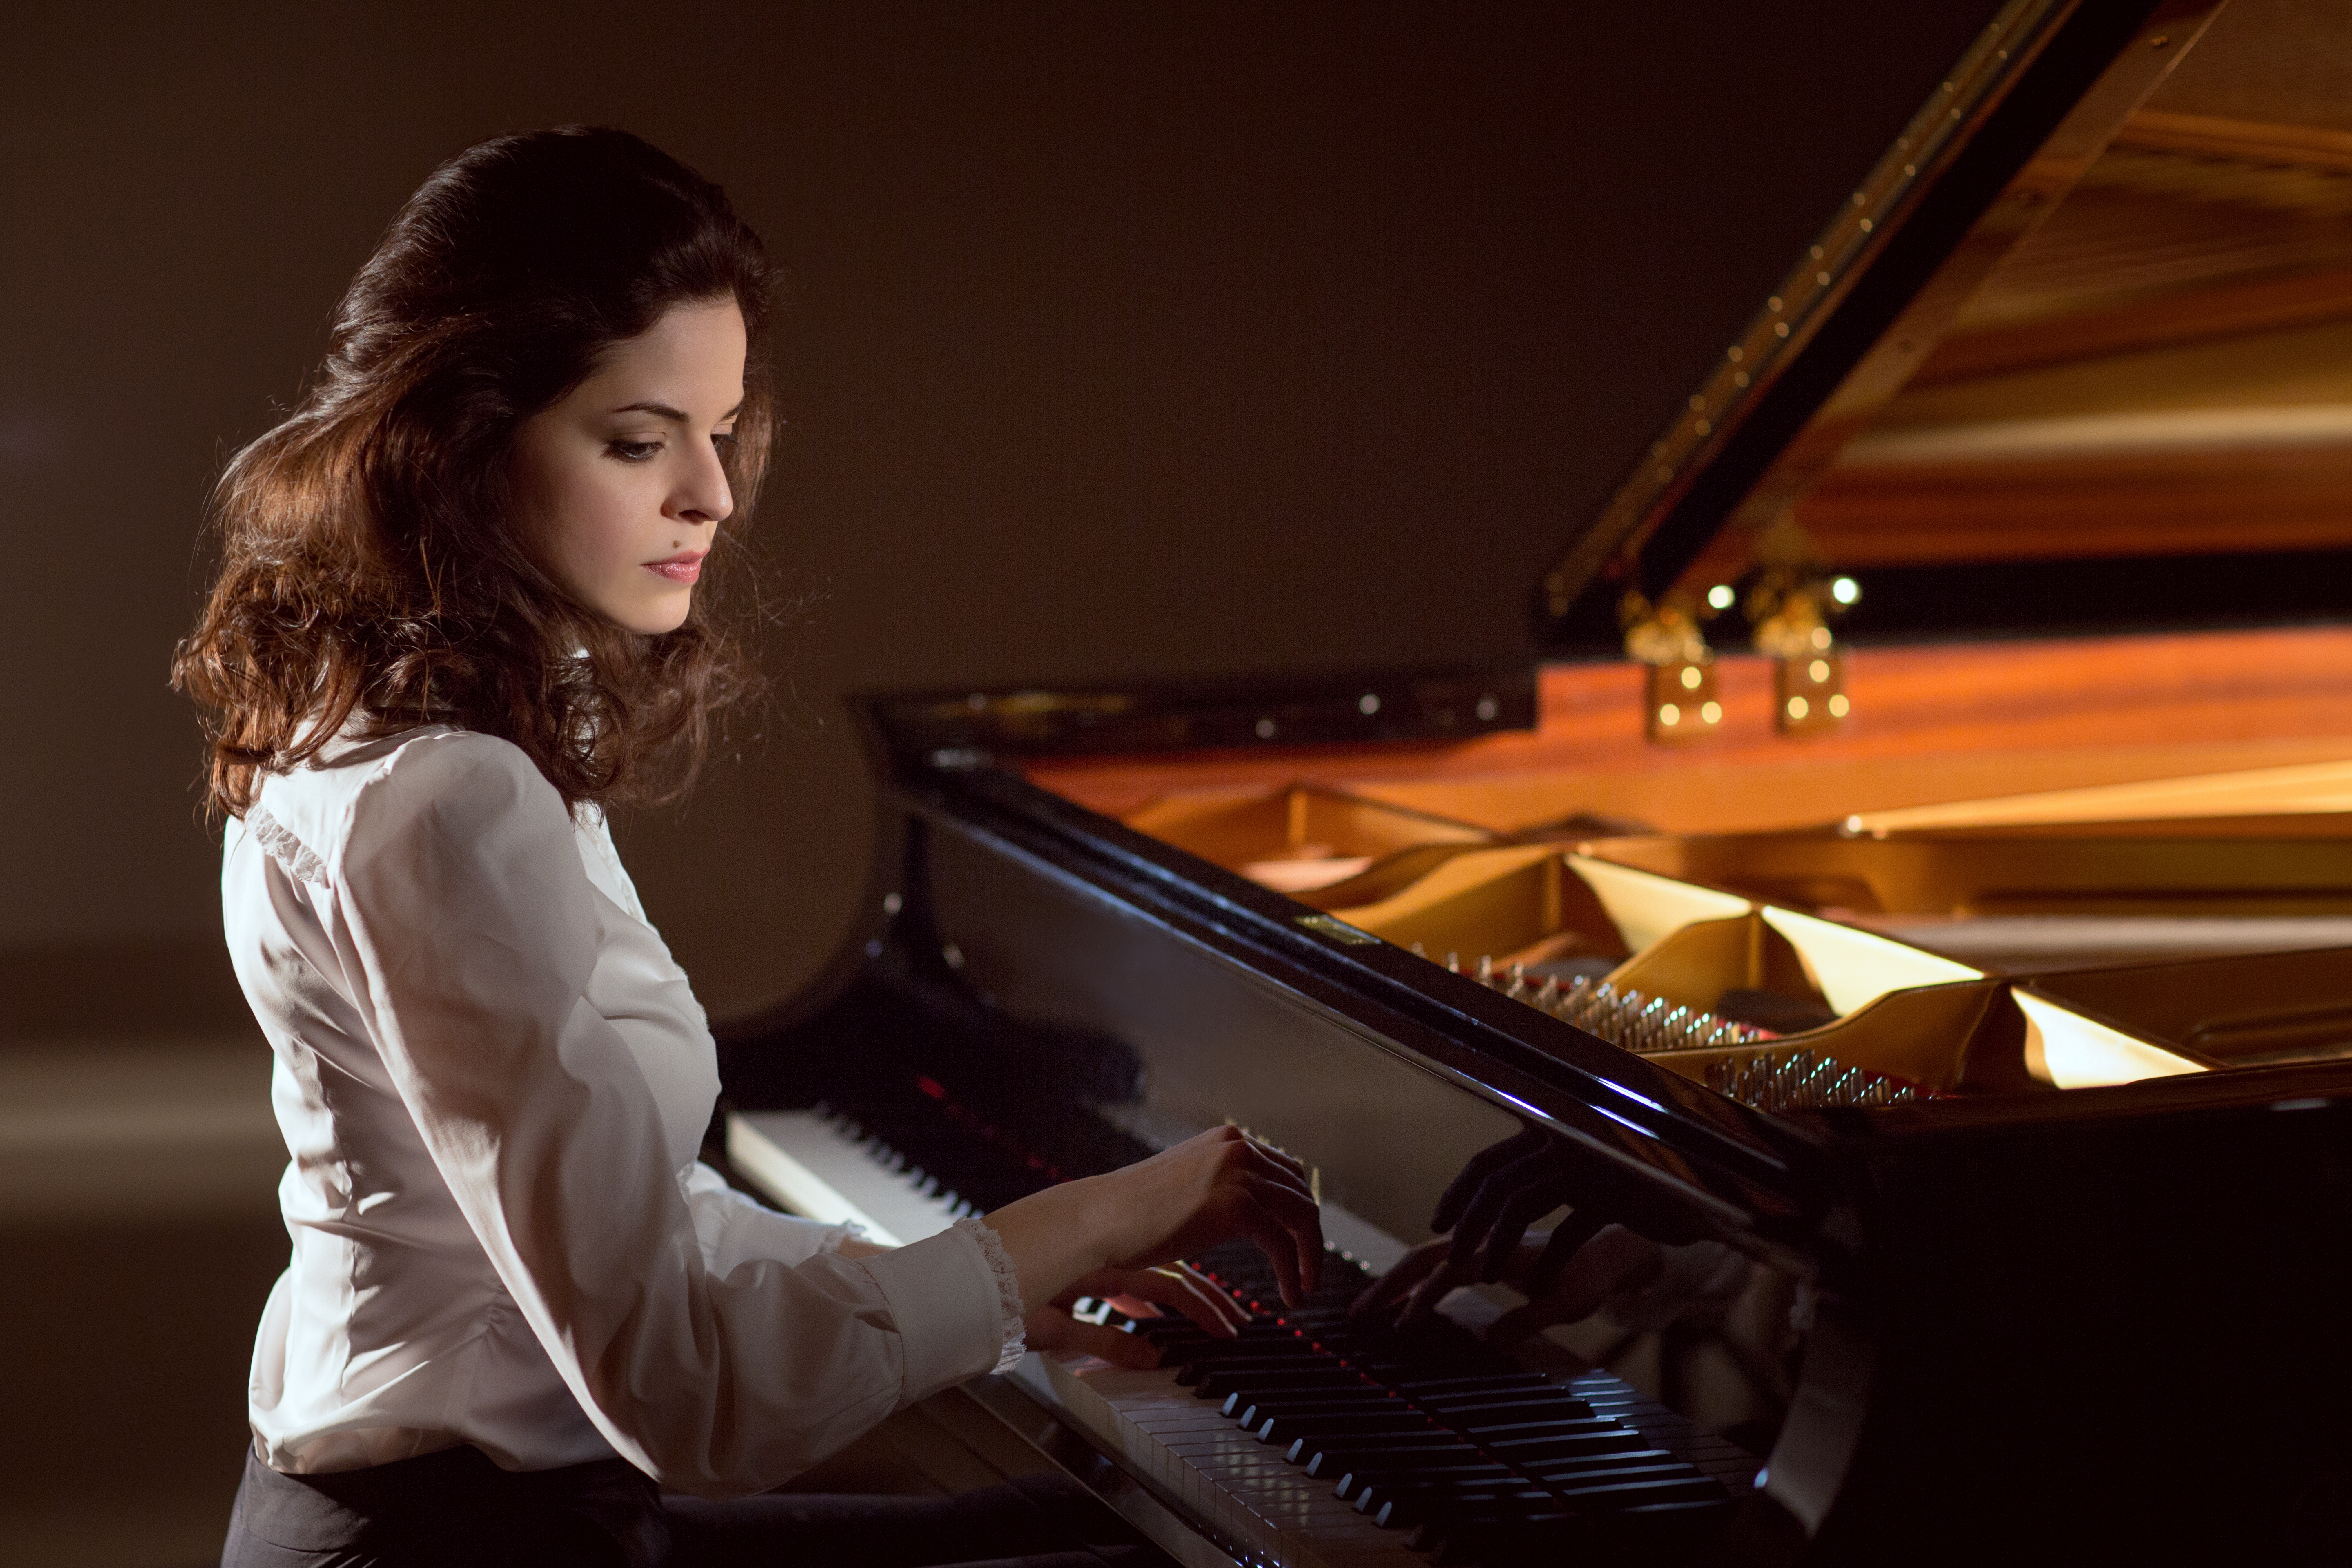 Review: Zlata Chochieva brings an intuitive and poetic touch to Chopin, Rachmaninoff